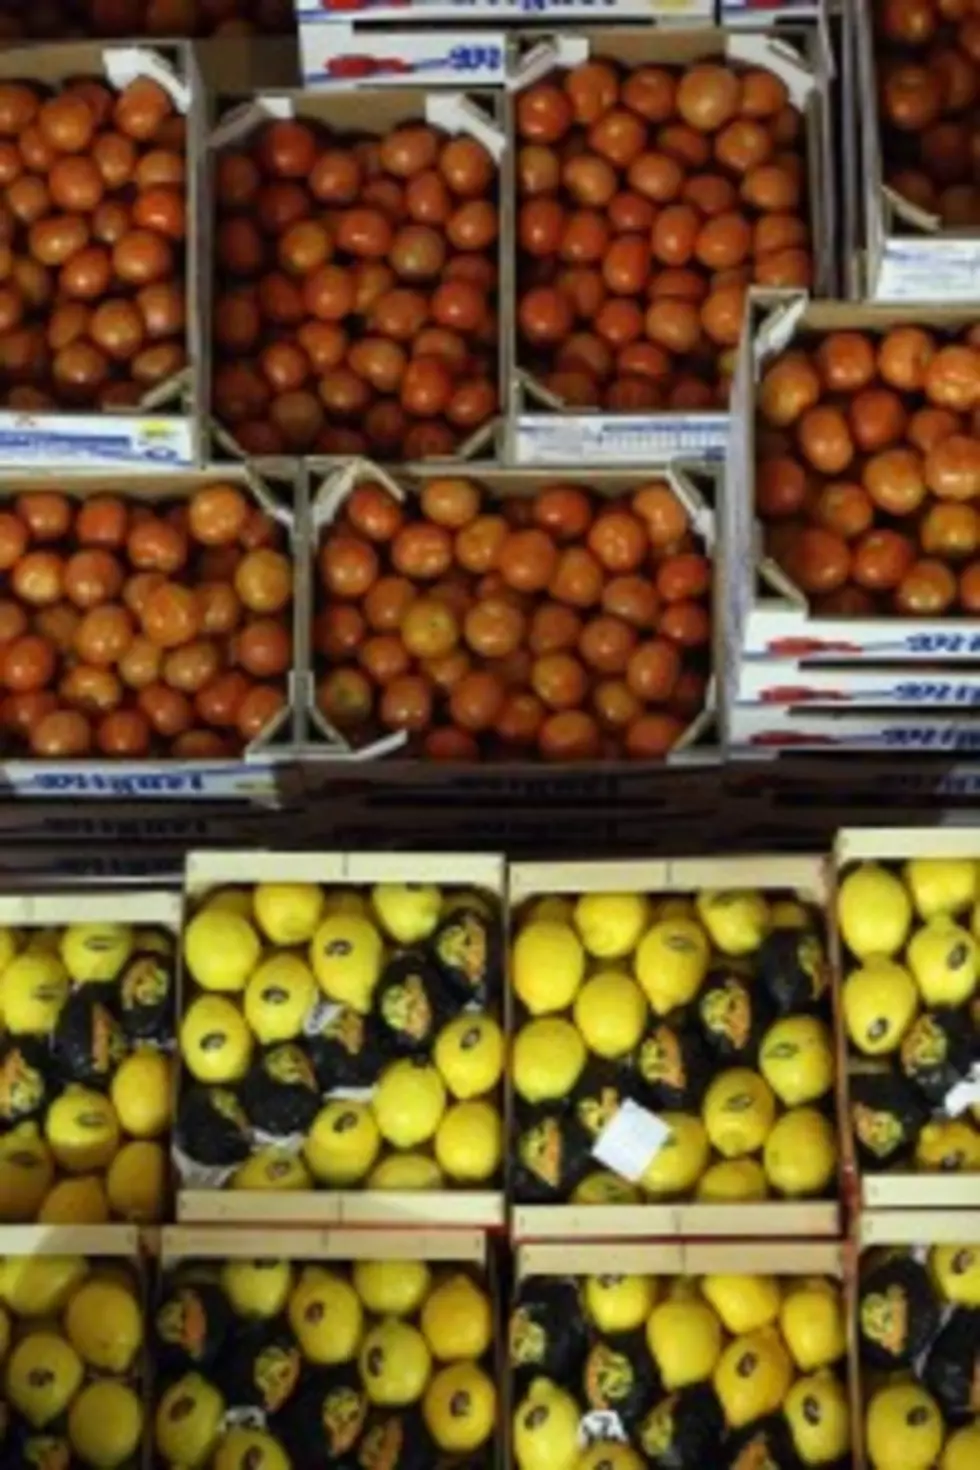 Food Prices Continue to Rise [AUDIO]